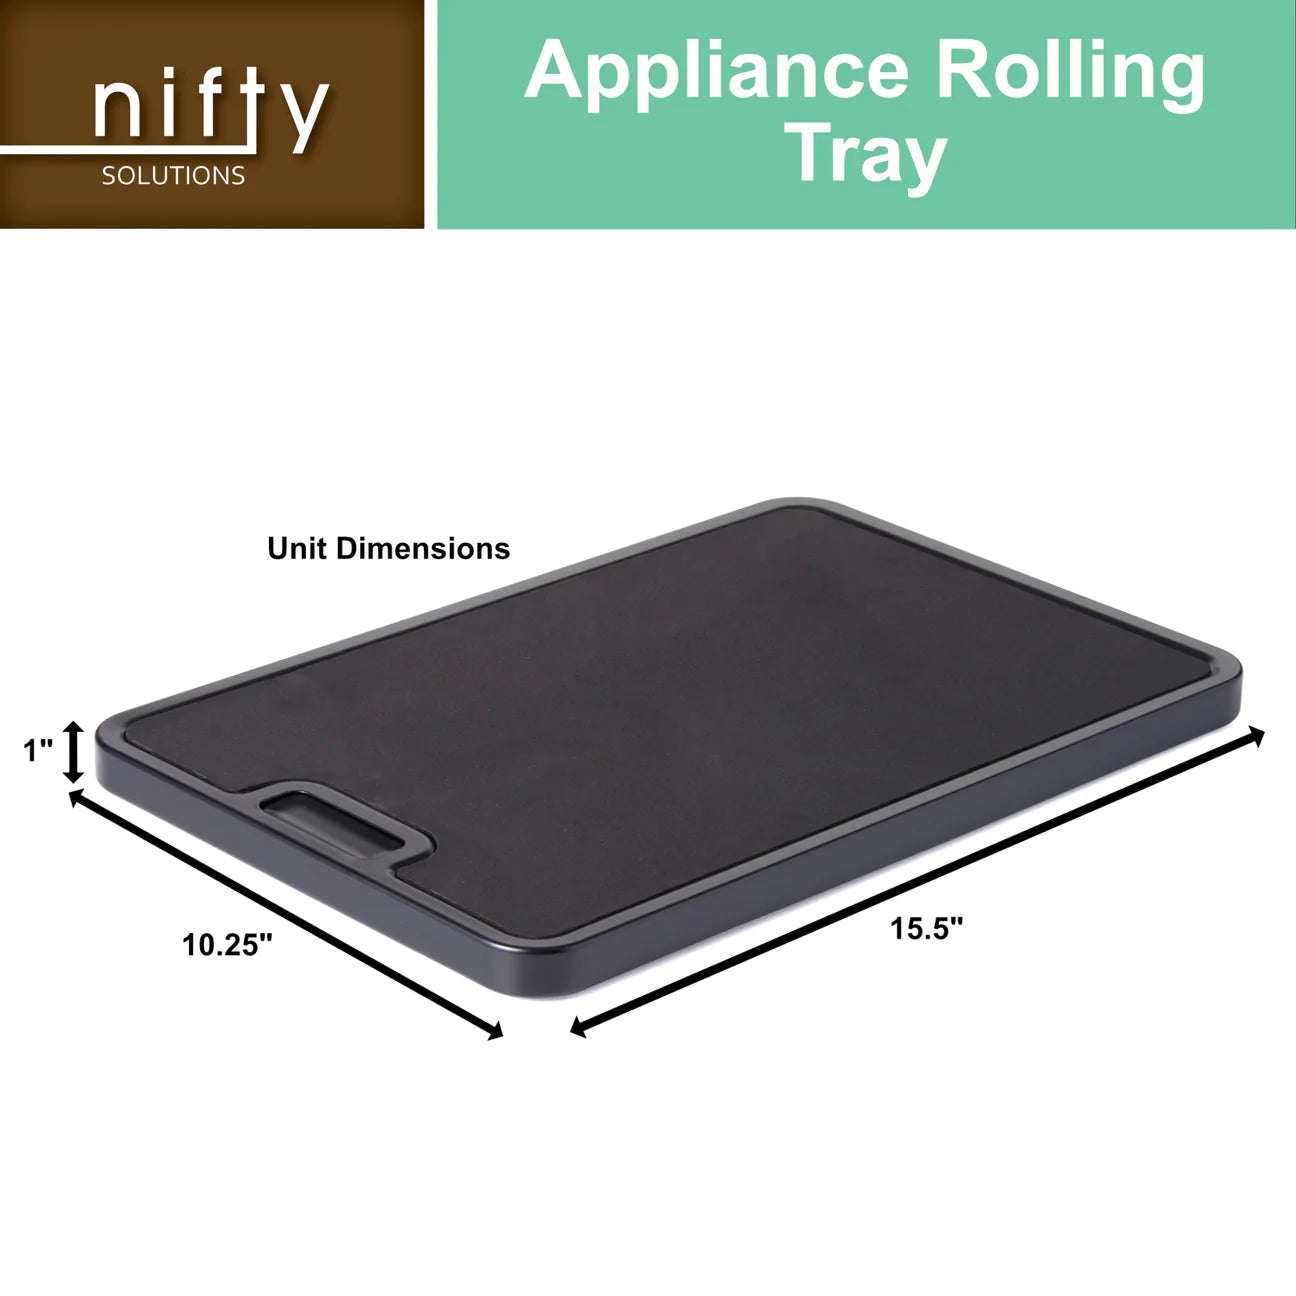 Nifty Appliance Rolling Tray